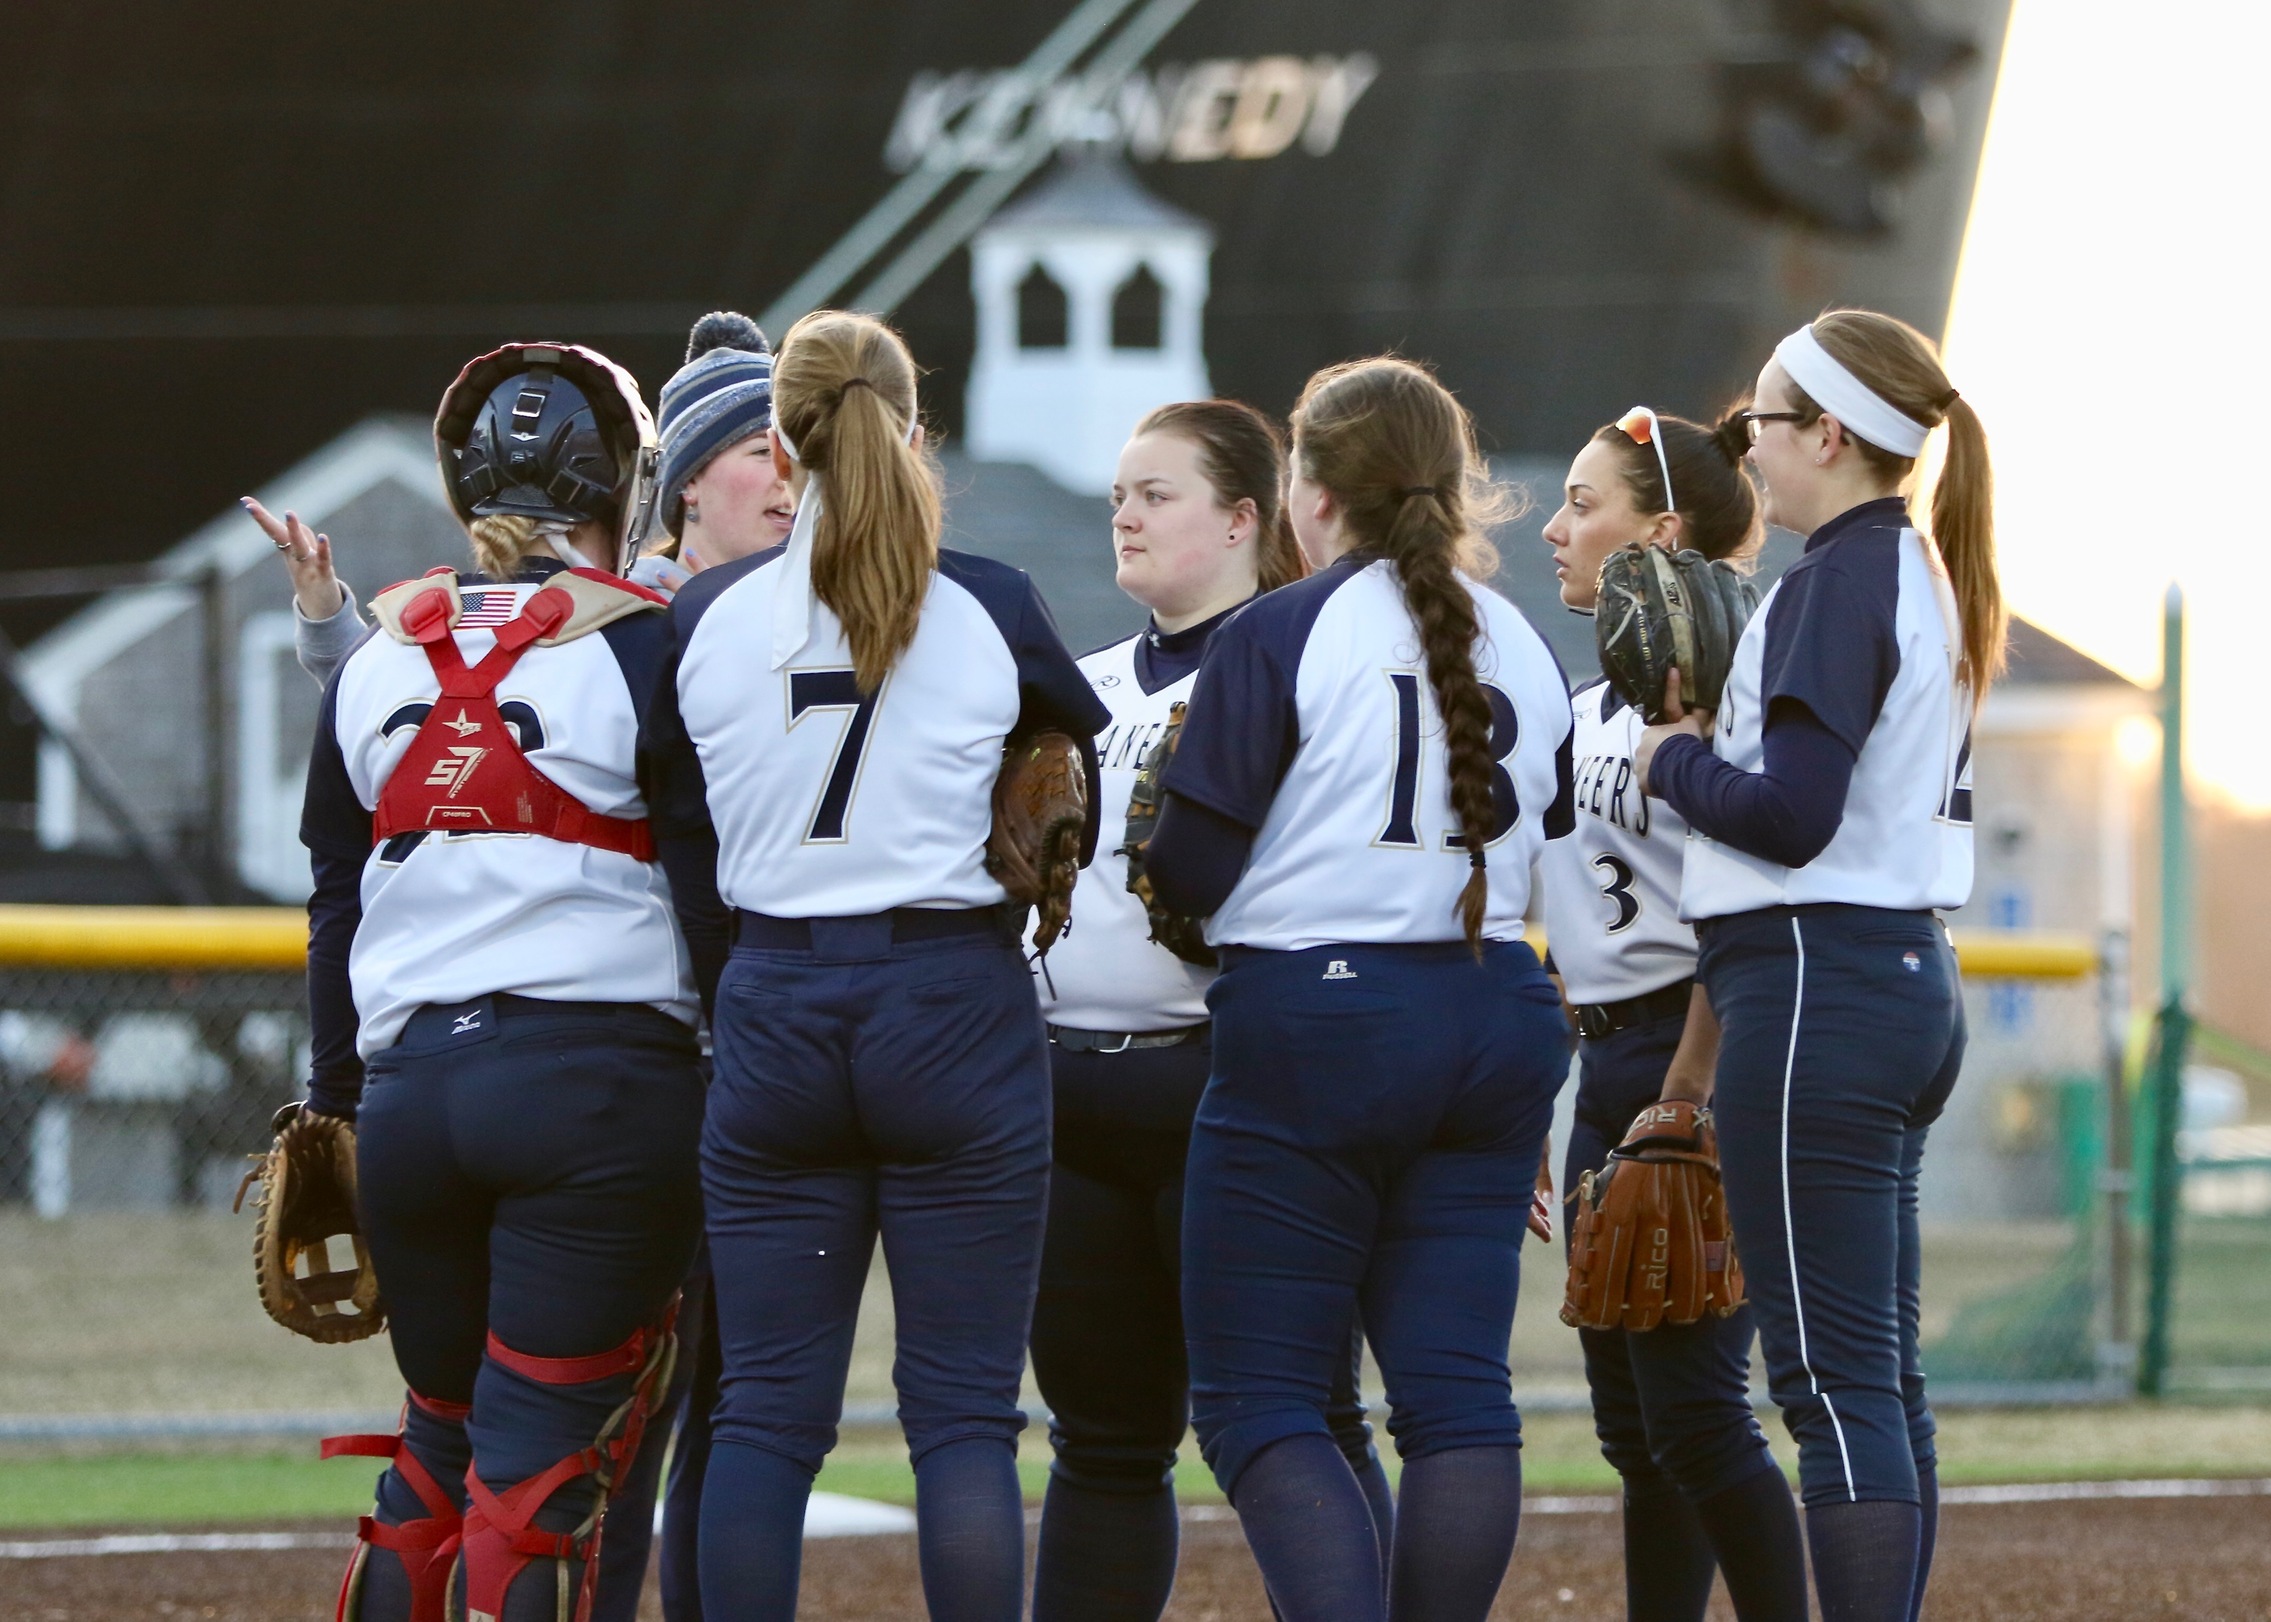 Softball Drops Two to Falcons in Conference Play